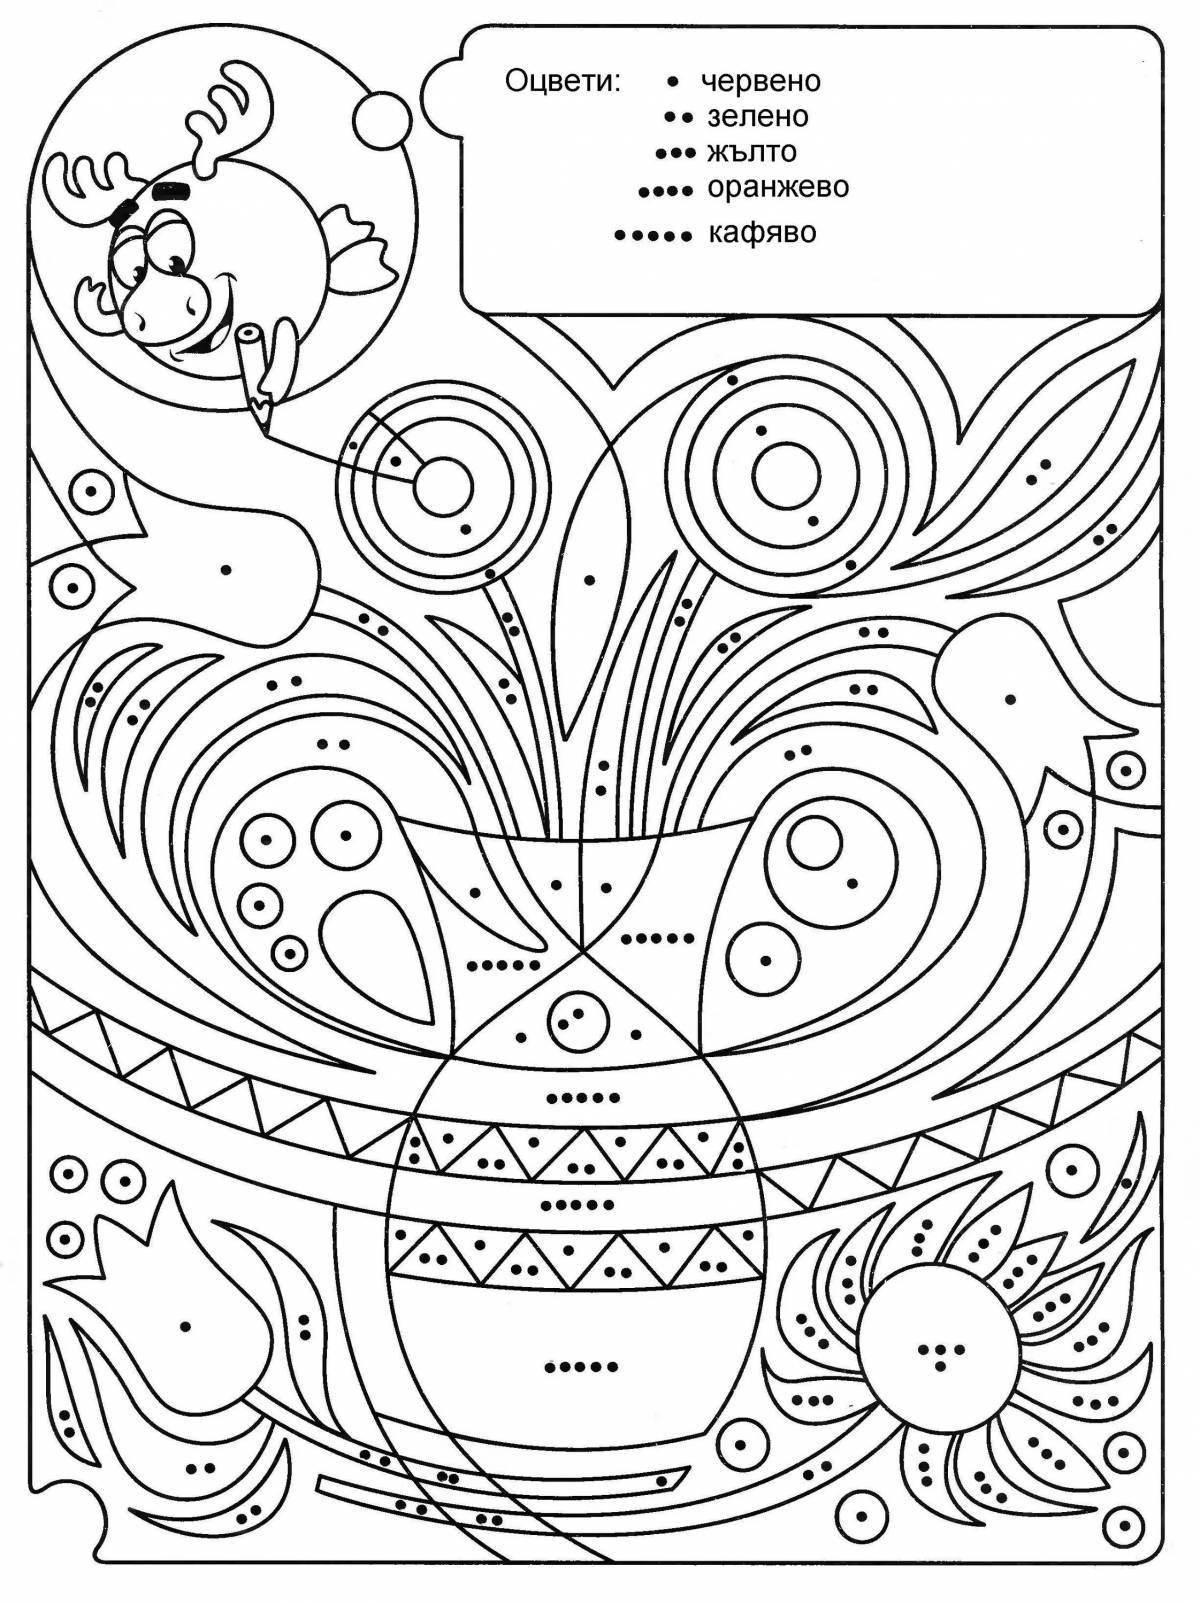 Fun coloring book for 6 to 7 year olds